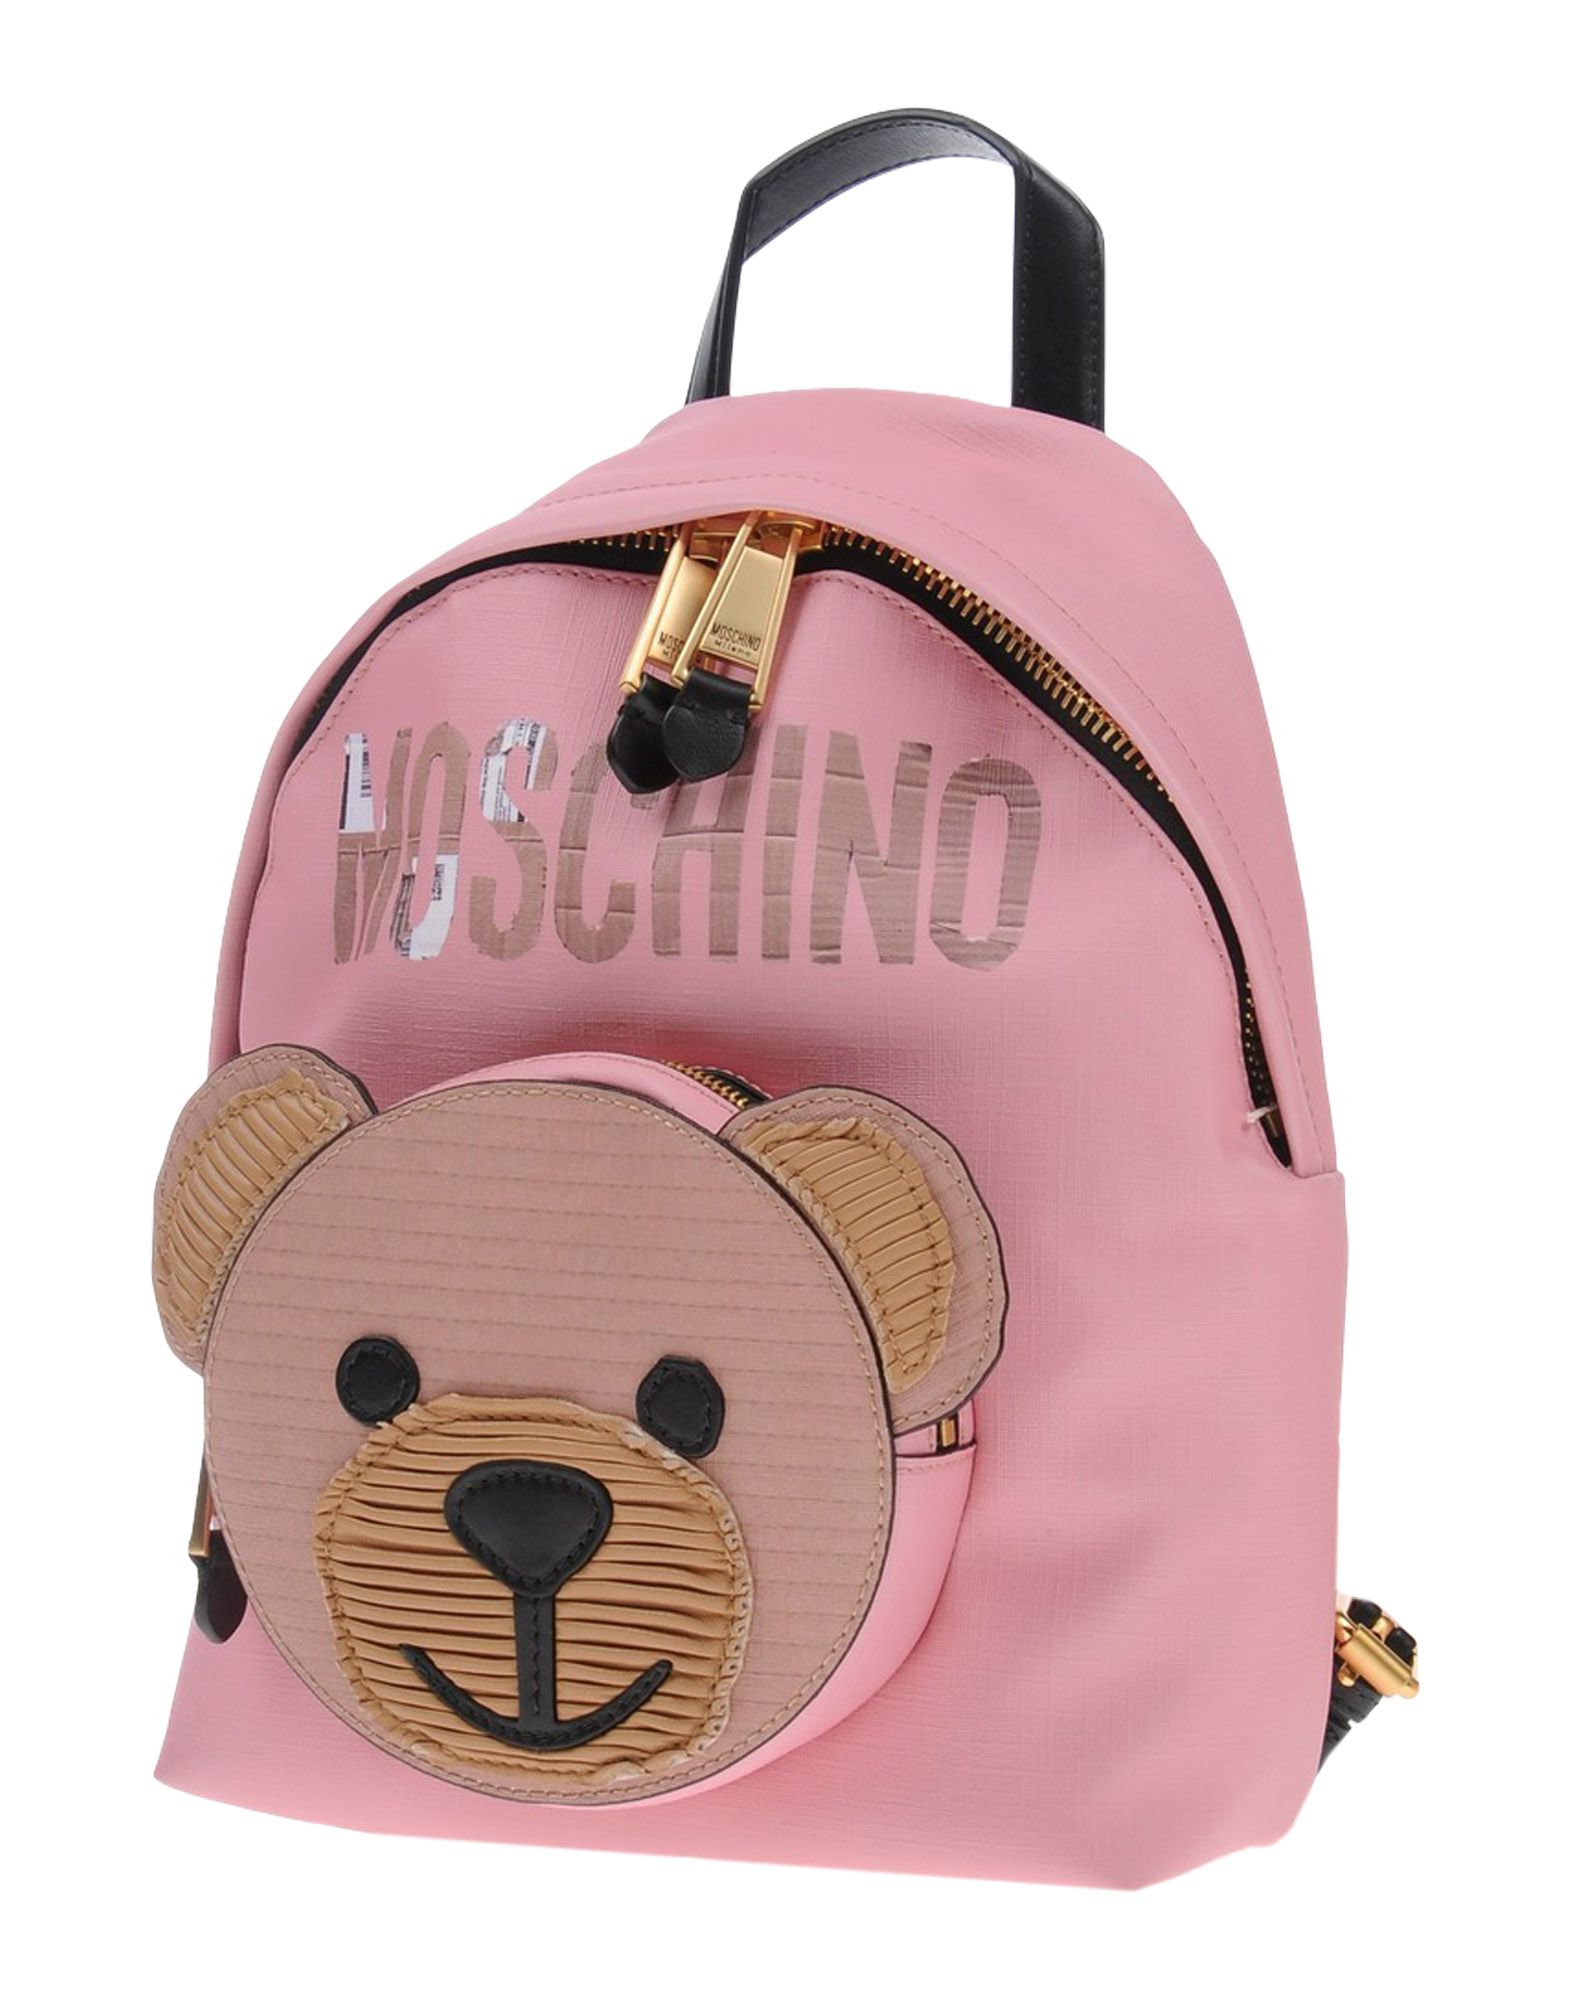 MOSCHINO Backpack & fanny pack,45399258AG 1